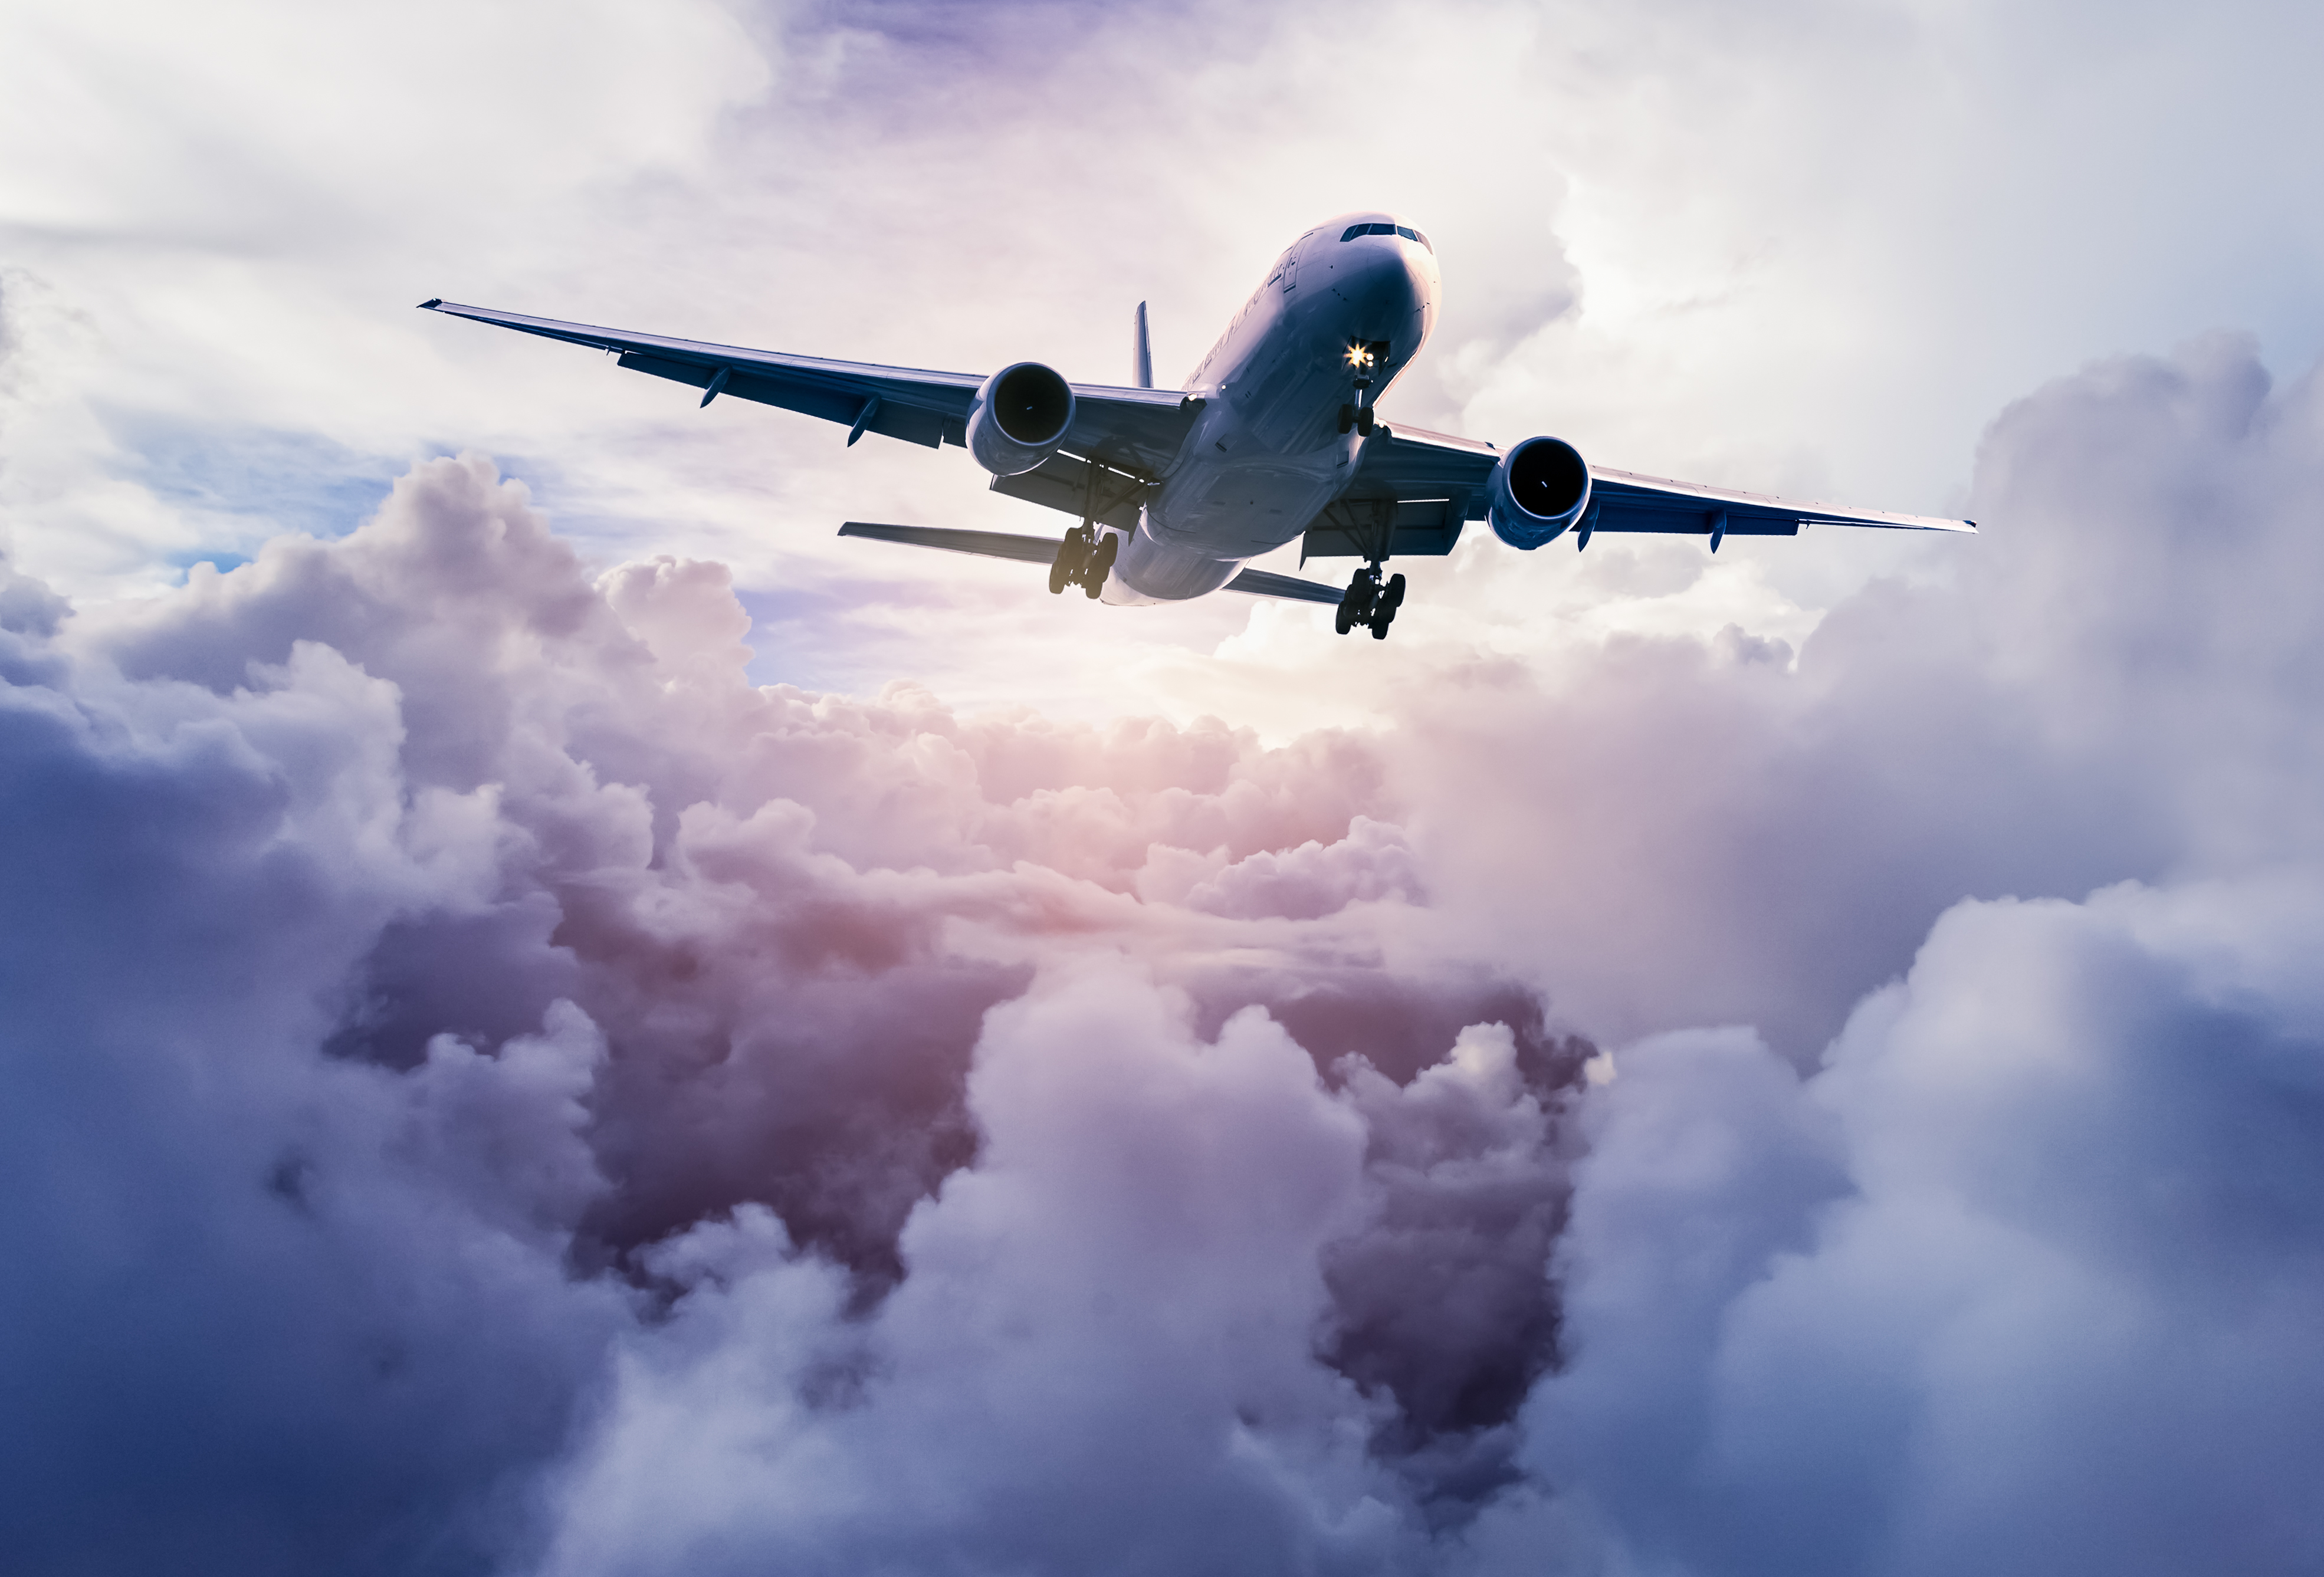 Why isn't the Civil Aviation Authority helping clients make delayed flight claims? | FairPlane